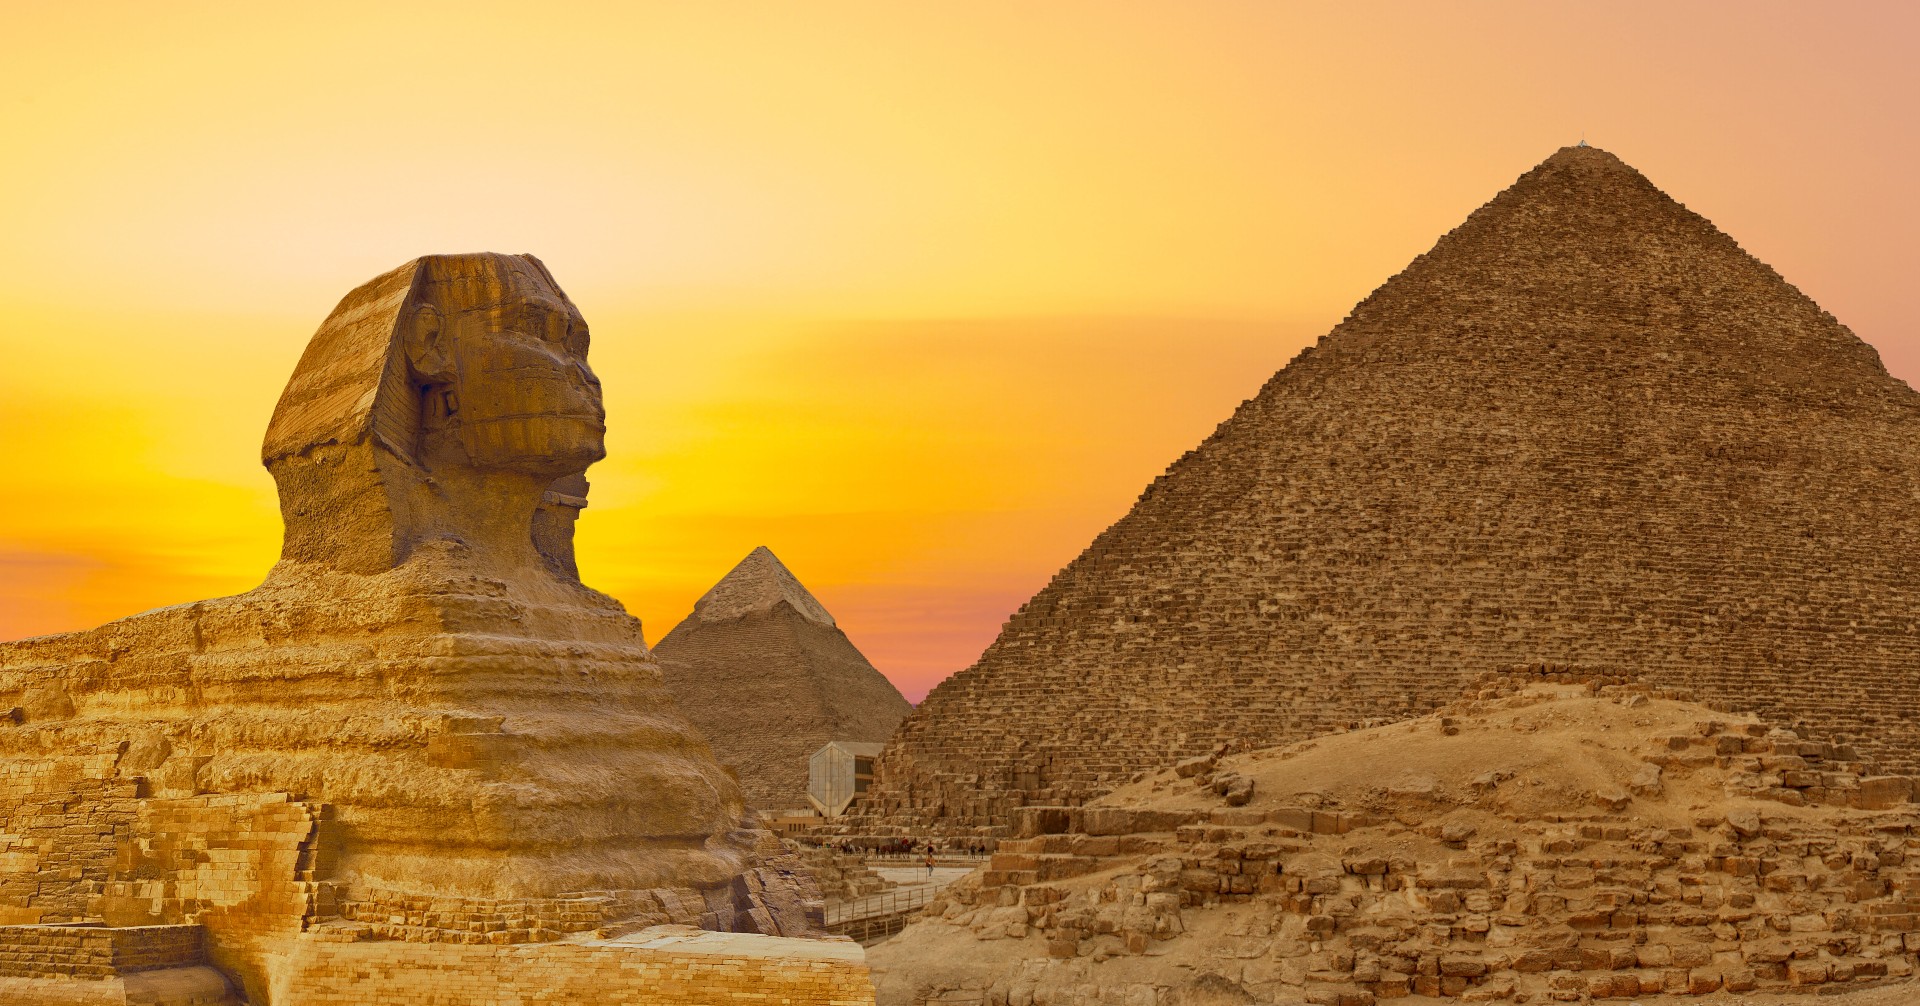 A photo of the Sphinx and Pyramids in Egypt